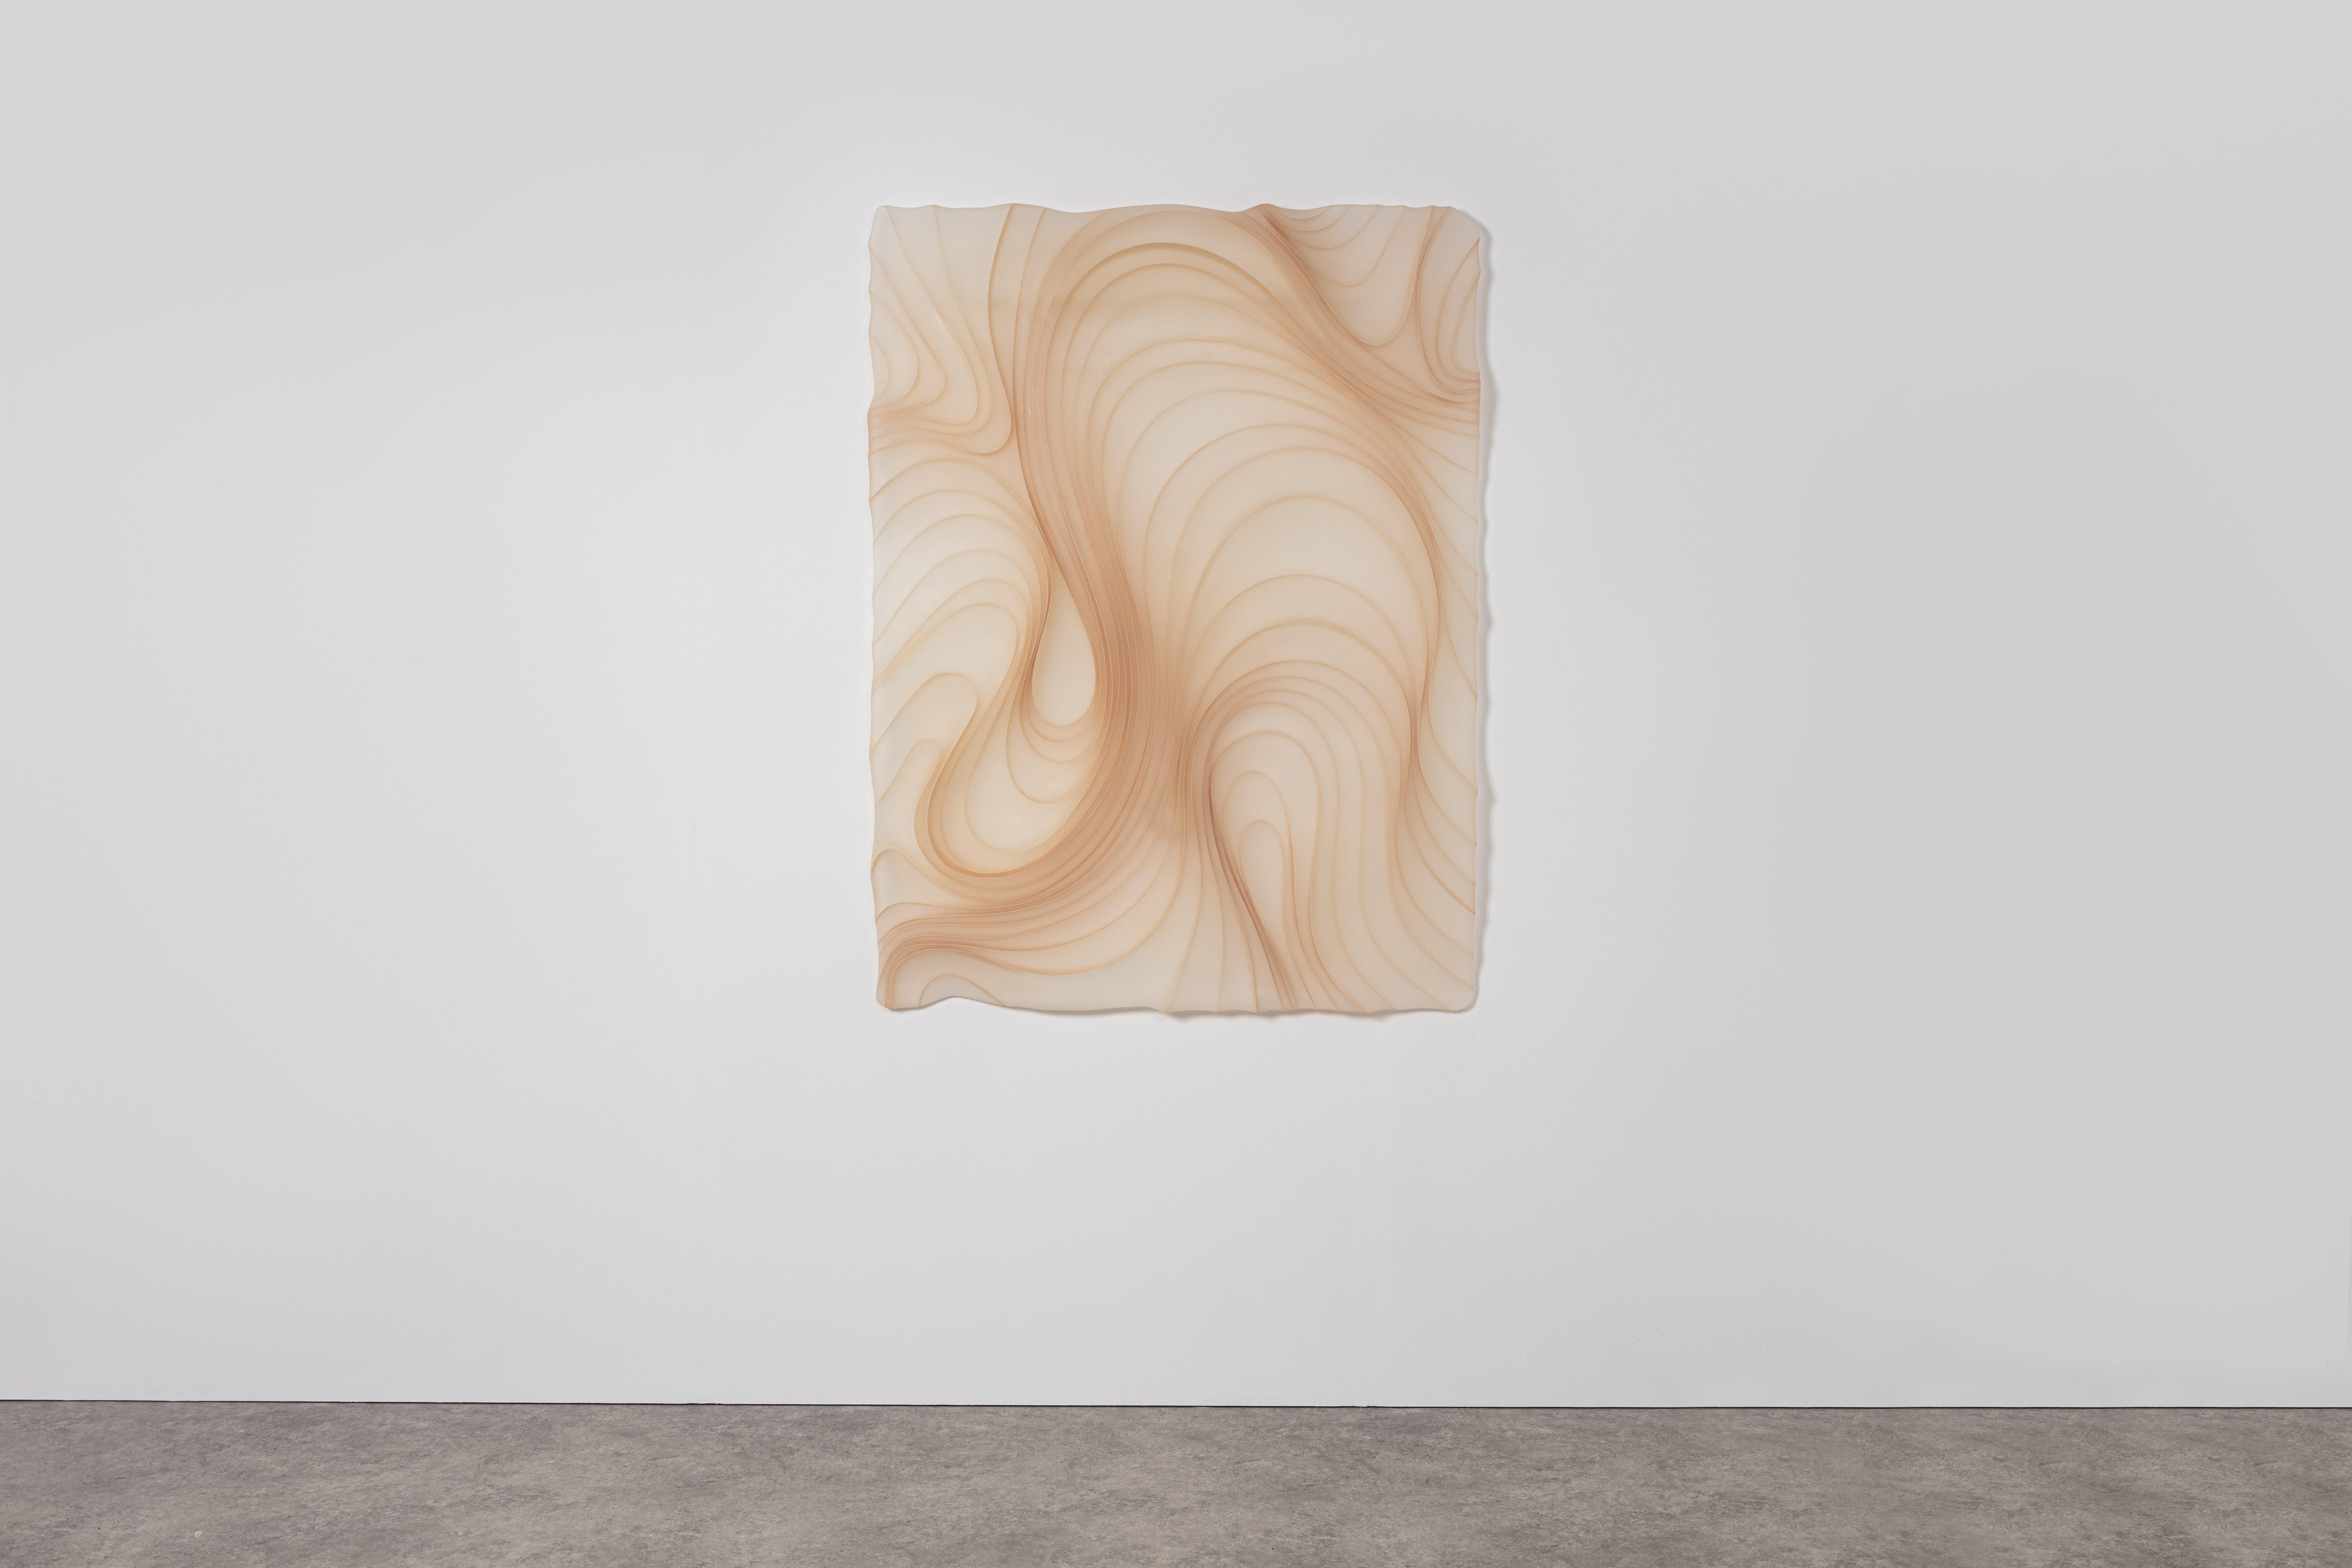 The Ethereal wall panel diptych is made from Marc Fish's usual laminated veneer technique, with the important difference that he leaves negative space between them – treating them not as layers within a solid stratigraphy, but as fins within a more